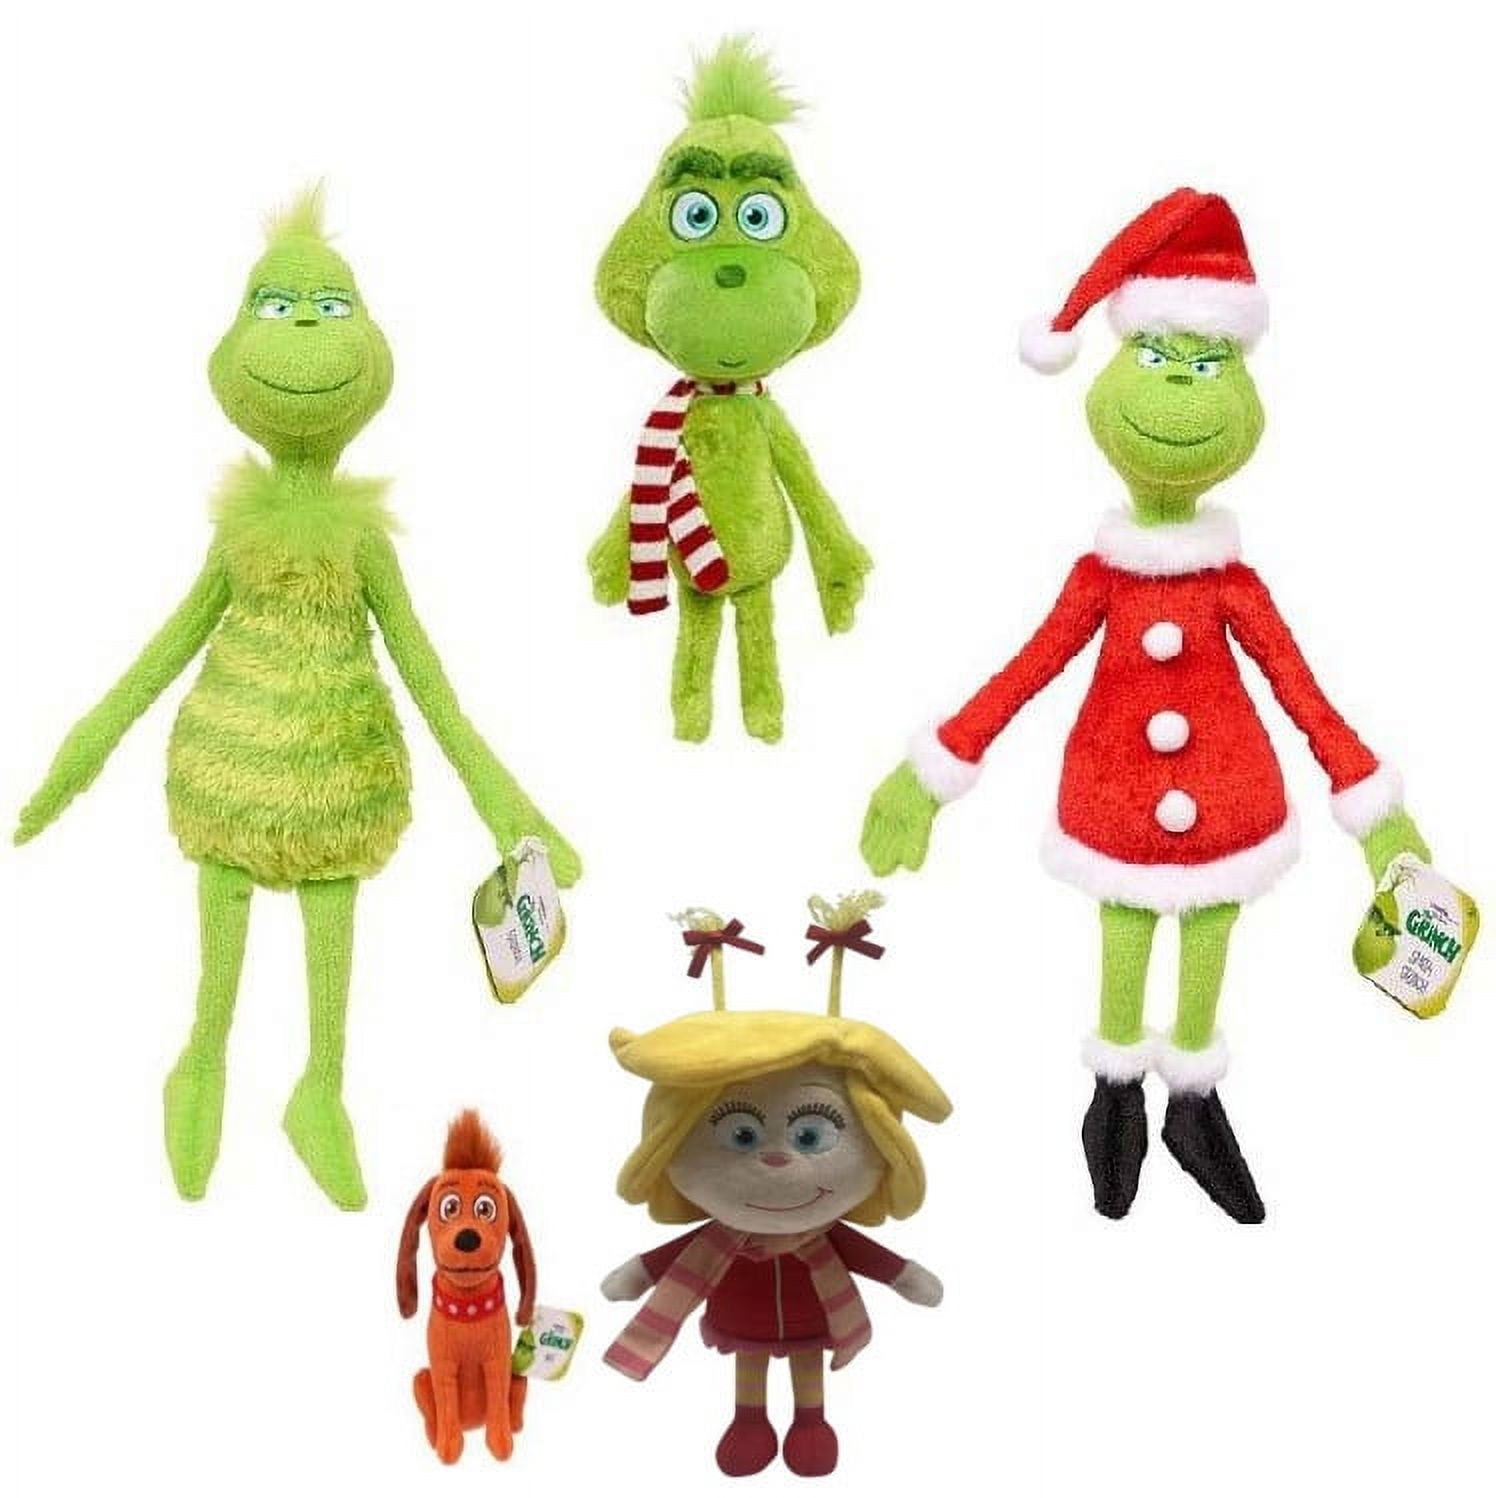 The Grinch Christmas Plush Doll 12.6" How the Grinch Stole Christmas  Cartoon Toys Set Children Gift